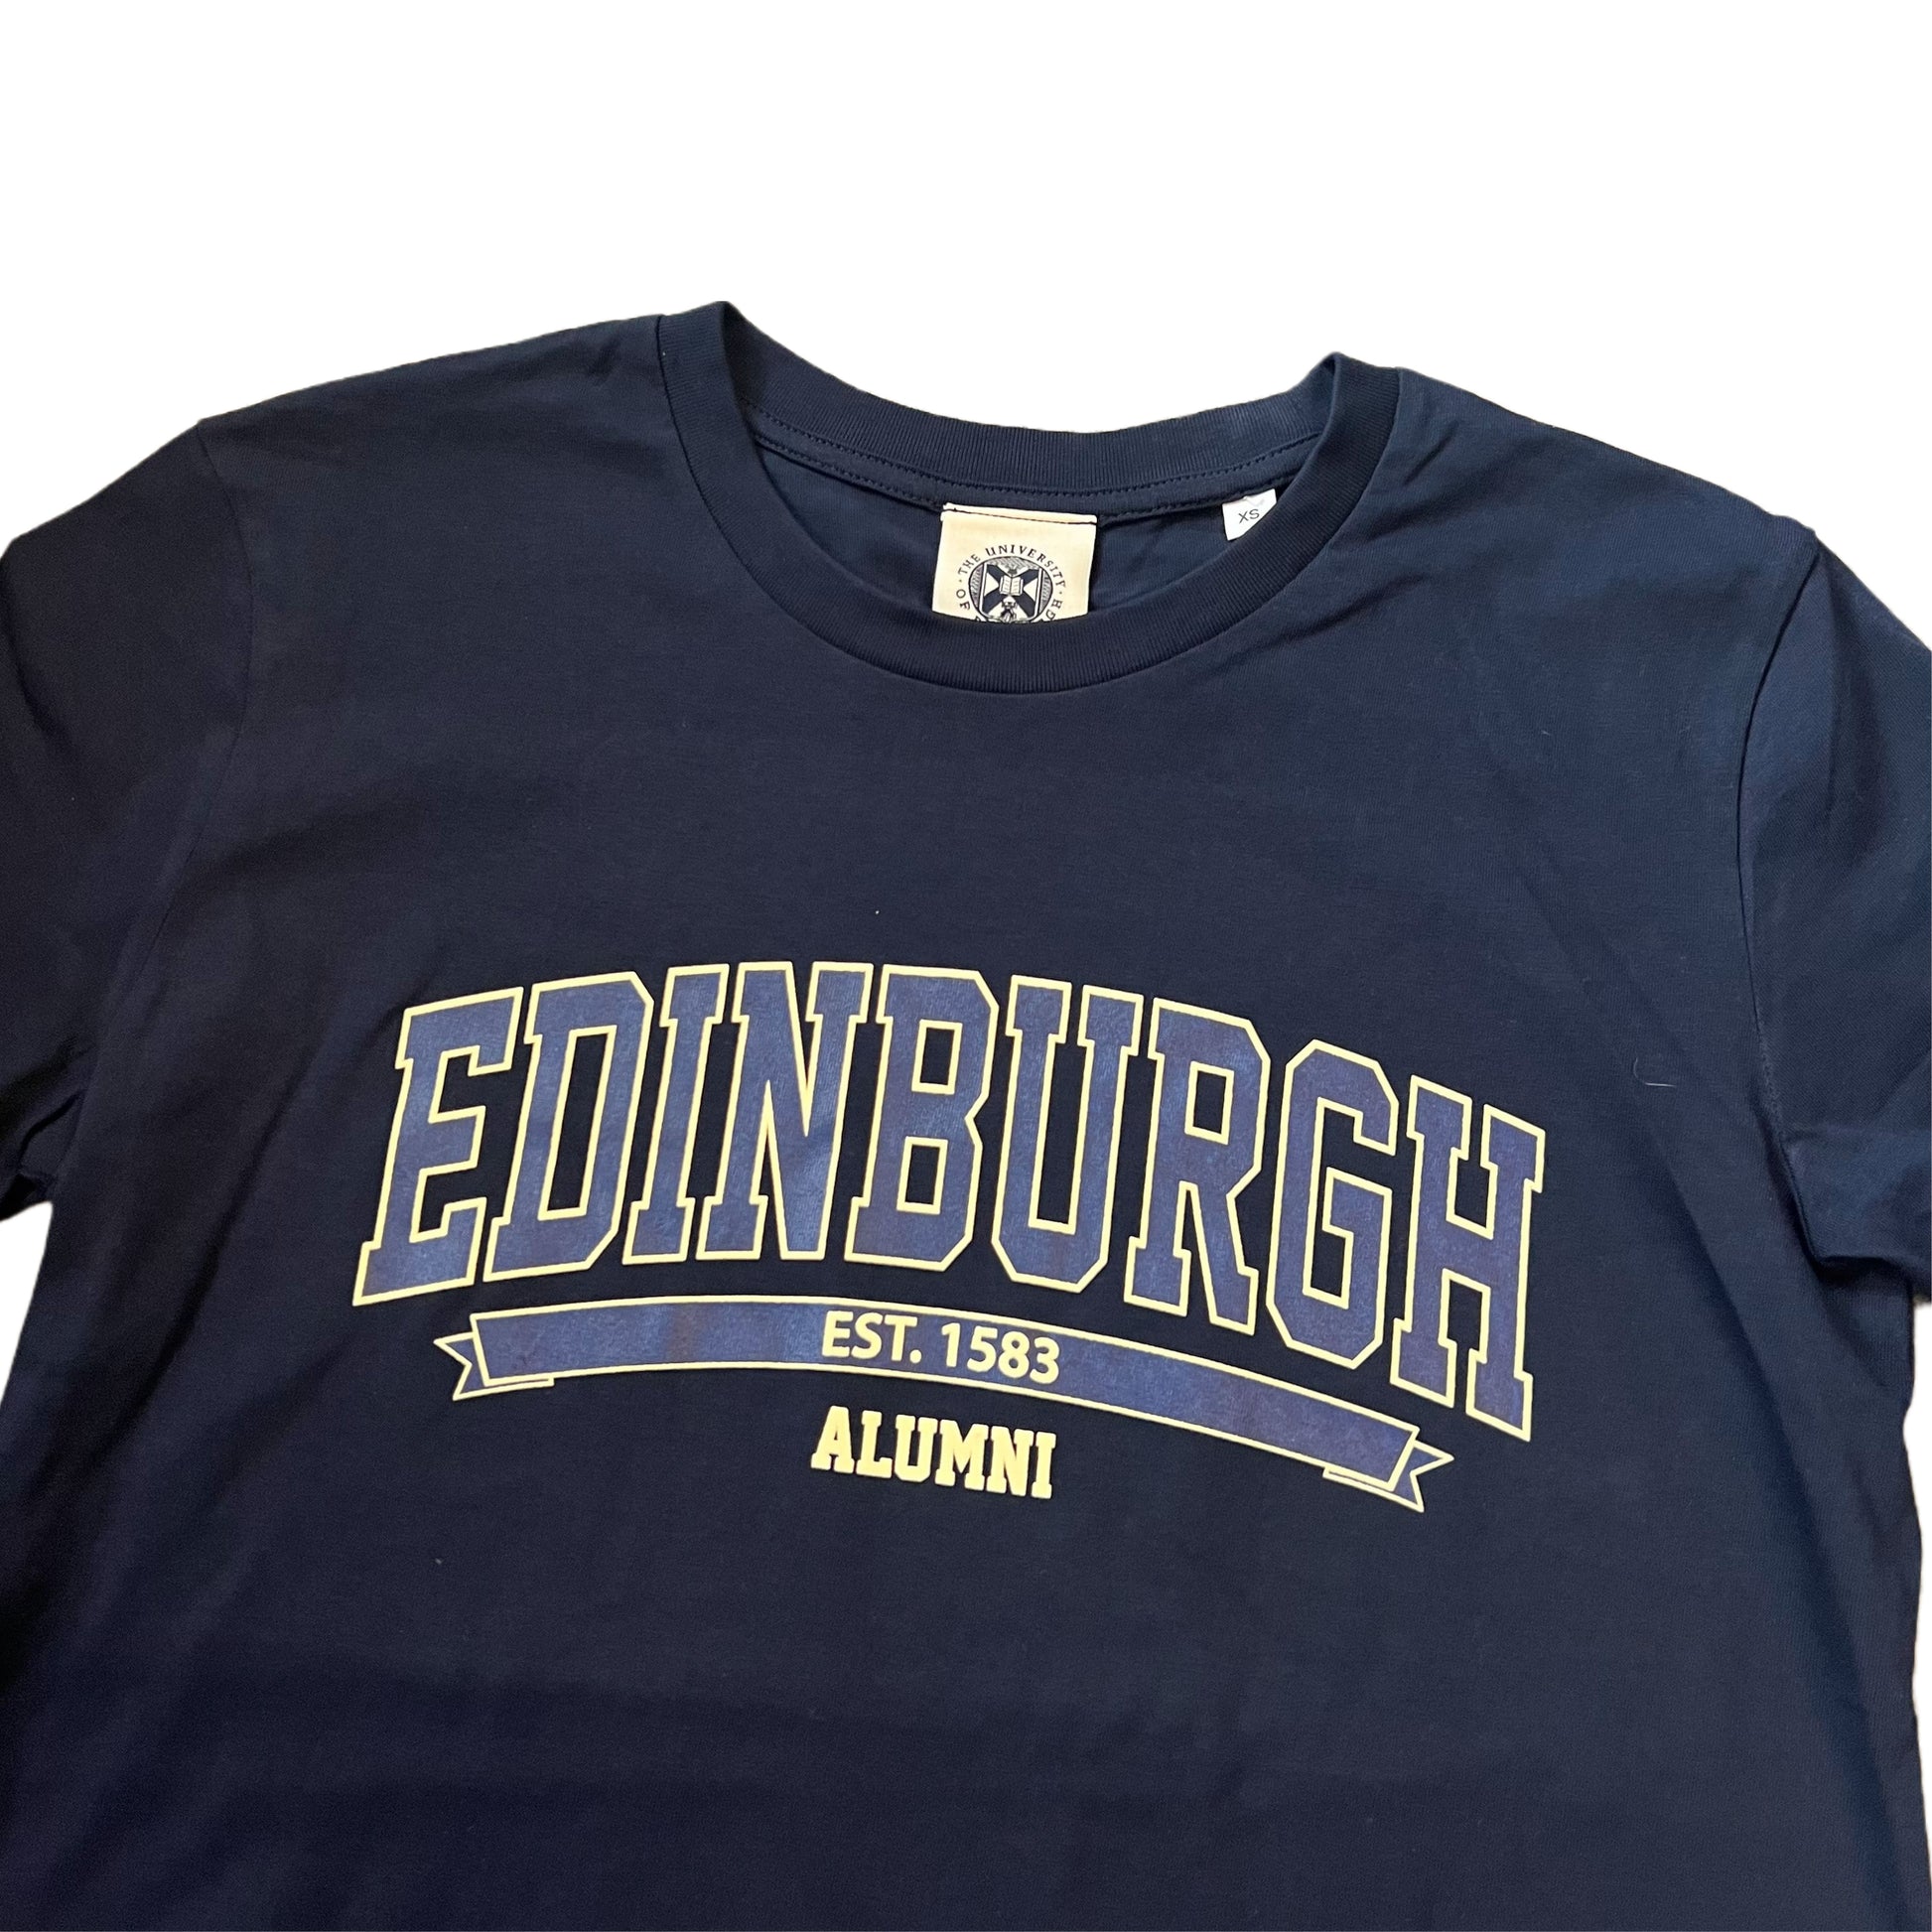 CLose up of Navy T-shirt with 'EDINBURGH ALUMNI' text on the front in a lighter blue color